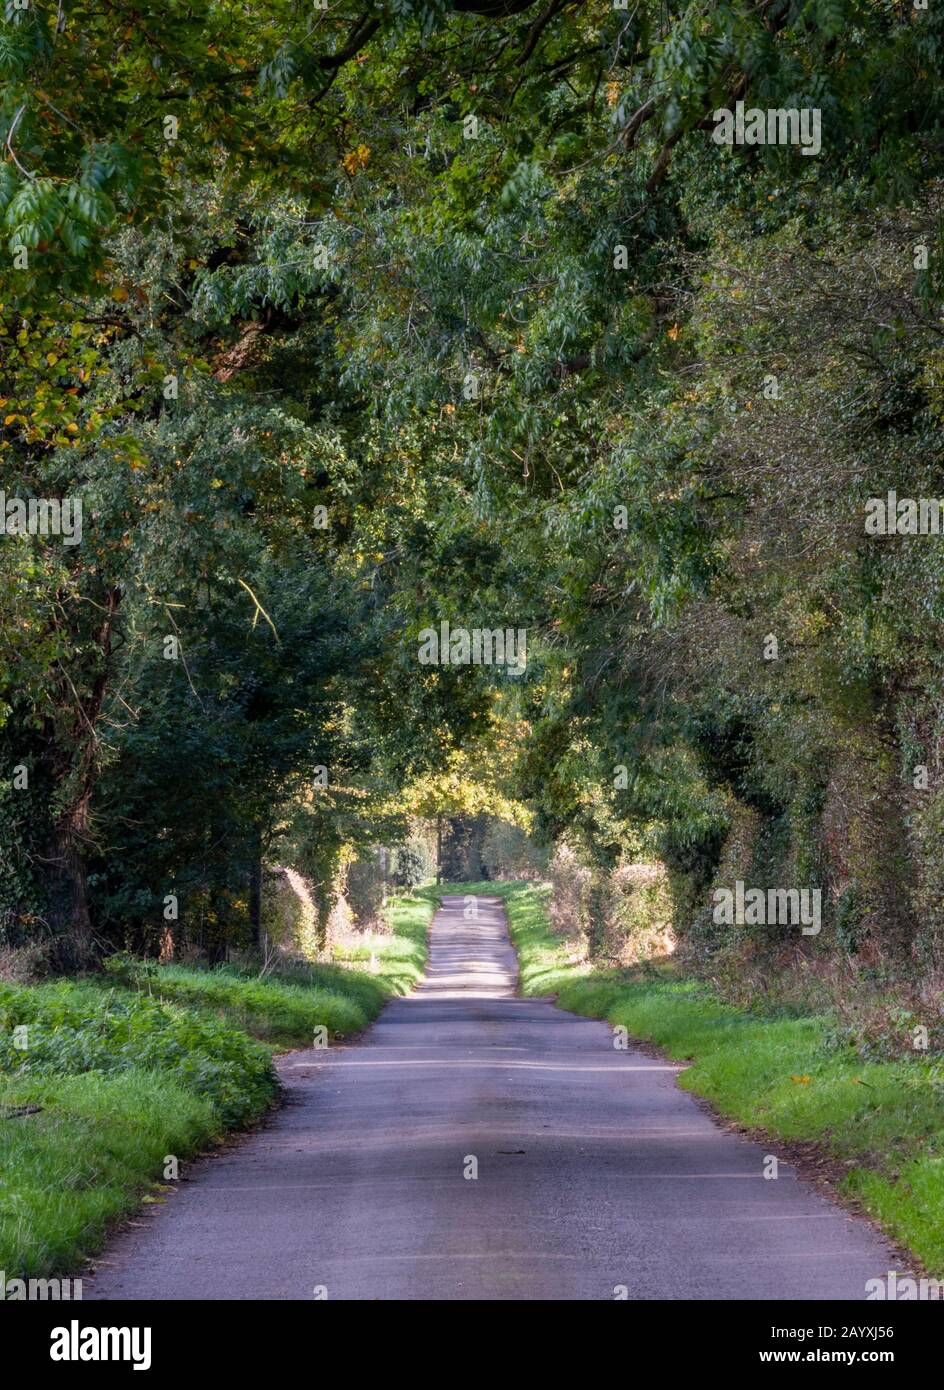 A pathway through a tunnel of trees in some woodland through a deeply forested area with shadows of trees across the pathway or road Stock Photo